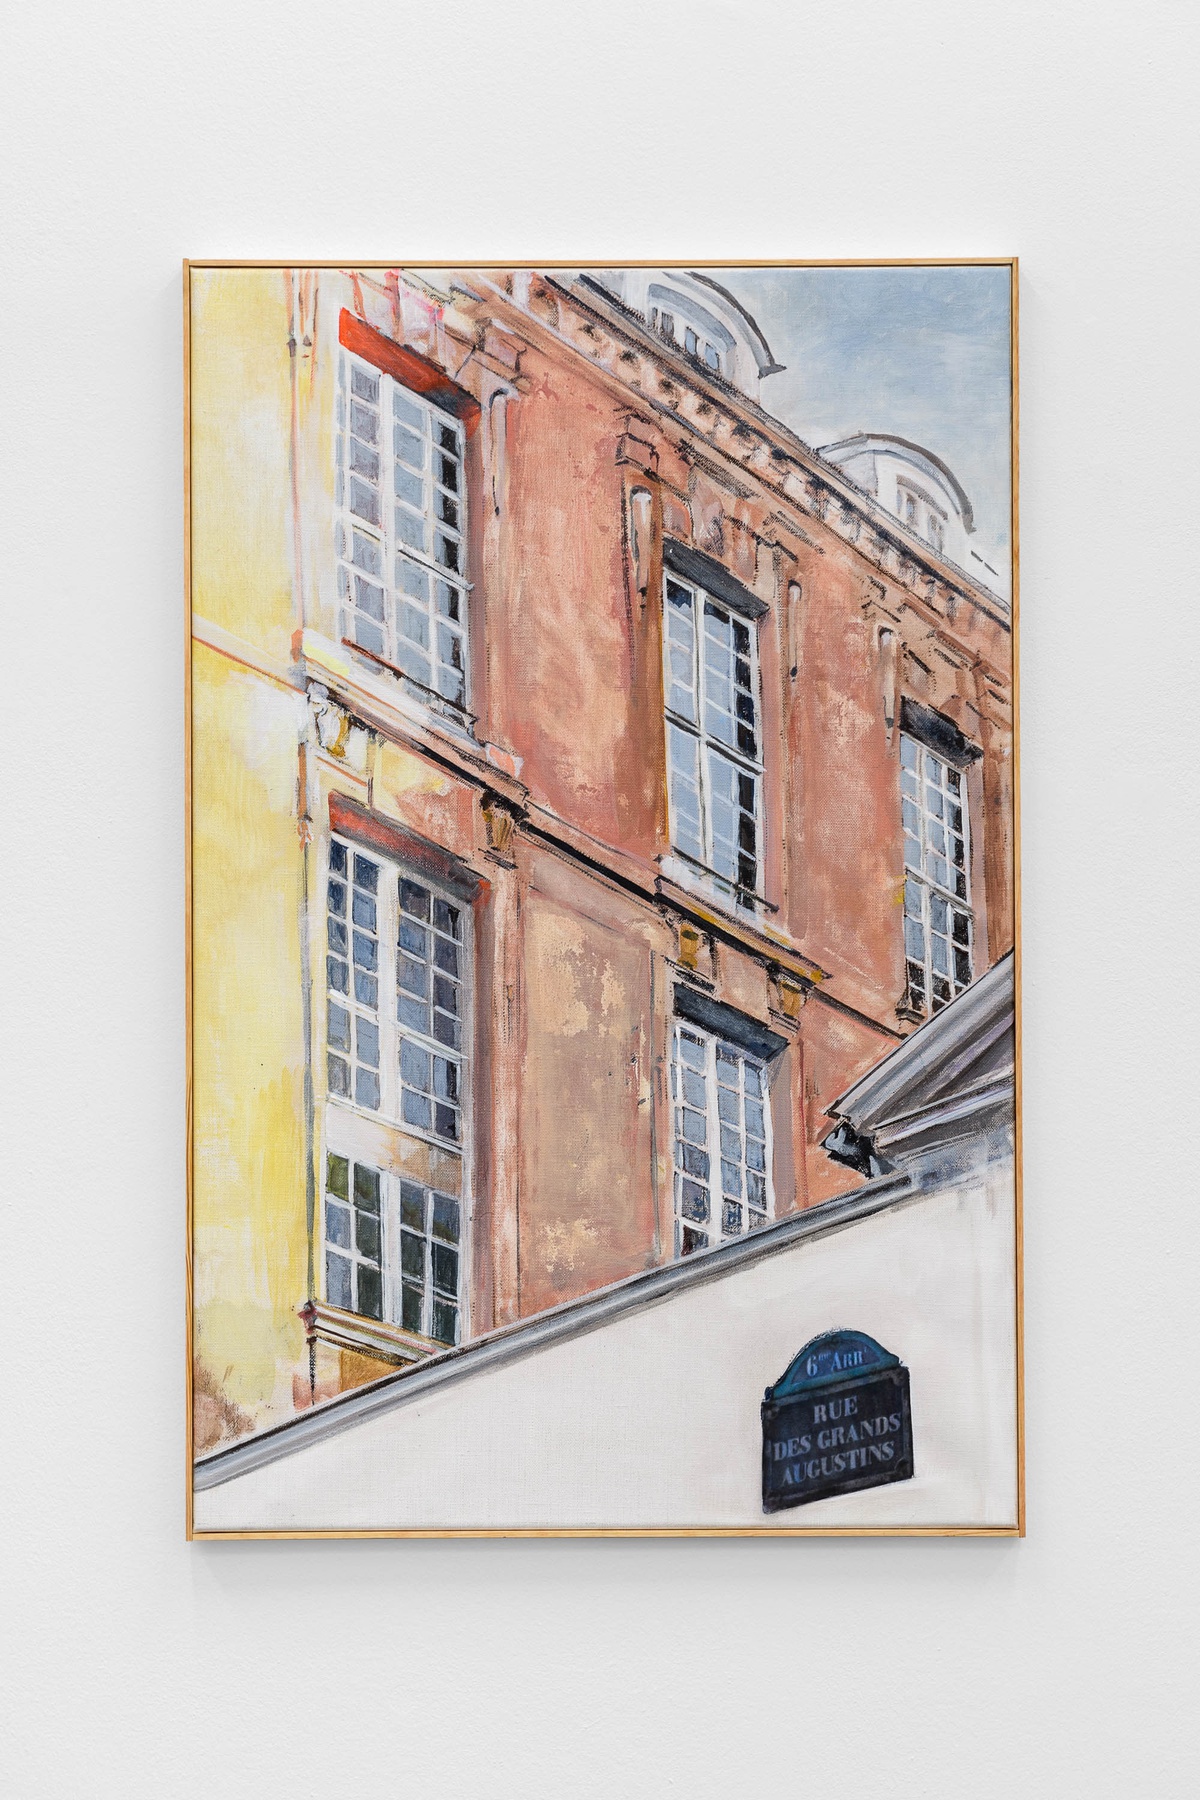 Ariane Müller, 7 rue de Grand Augustins 1, 2023acrylic and paper on canvas, artist made frame100 x 65 cm